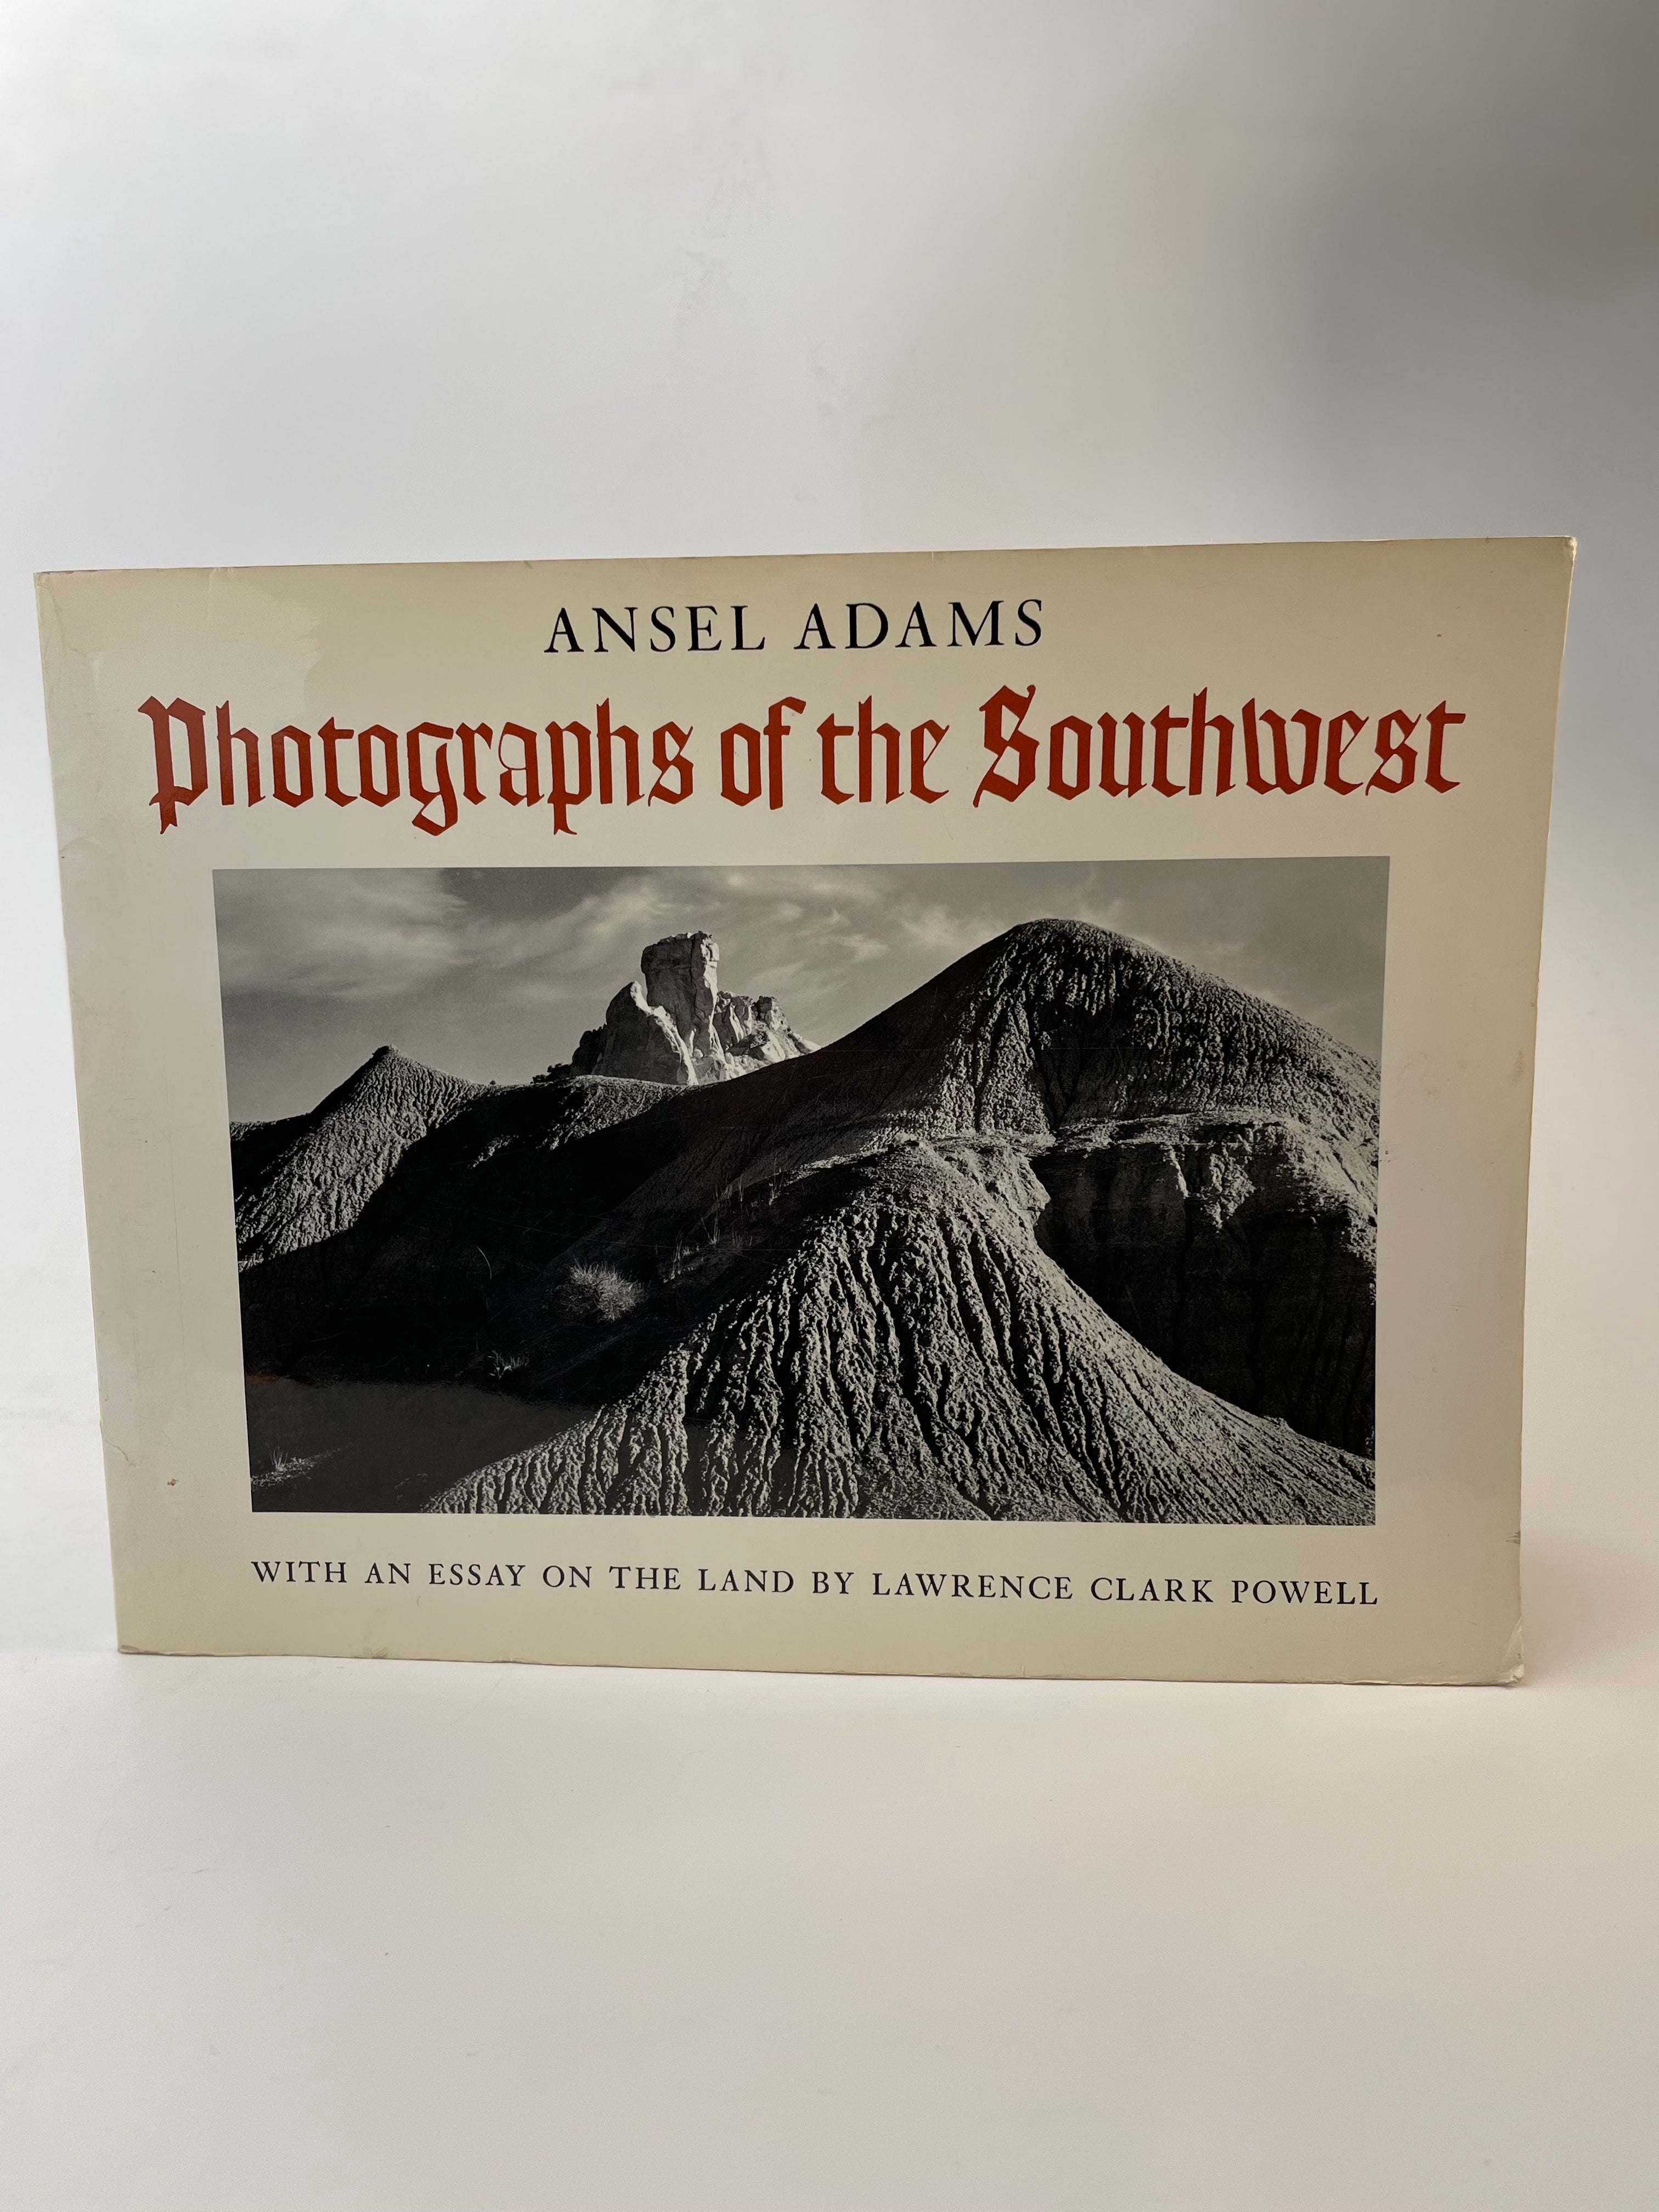 Photographs of the Southwest by Ansel Adams